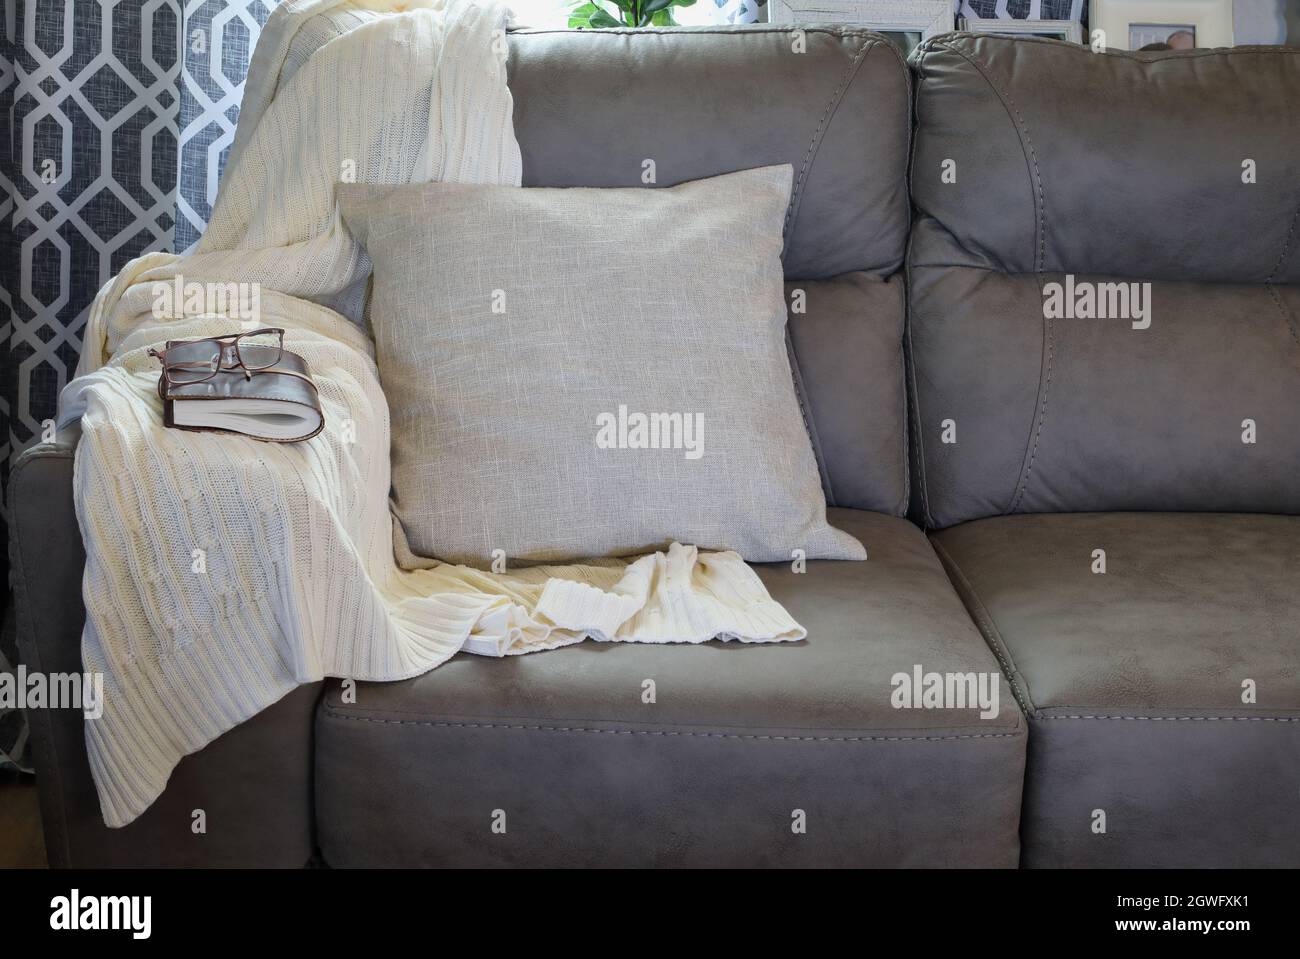 https://c8.alamy.com/comp/2GWFXK1/soft-knit-throw-blanket-over-the-arm-of-a-grey-couch-in-a-farmhouse-style-living-room-with-closed-book-and-reading-glasses-2GWFXK1.jpg